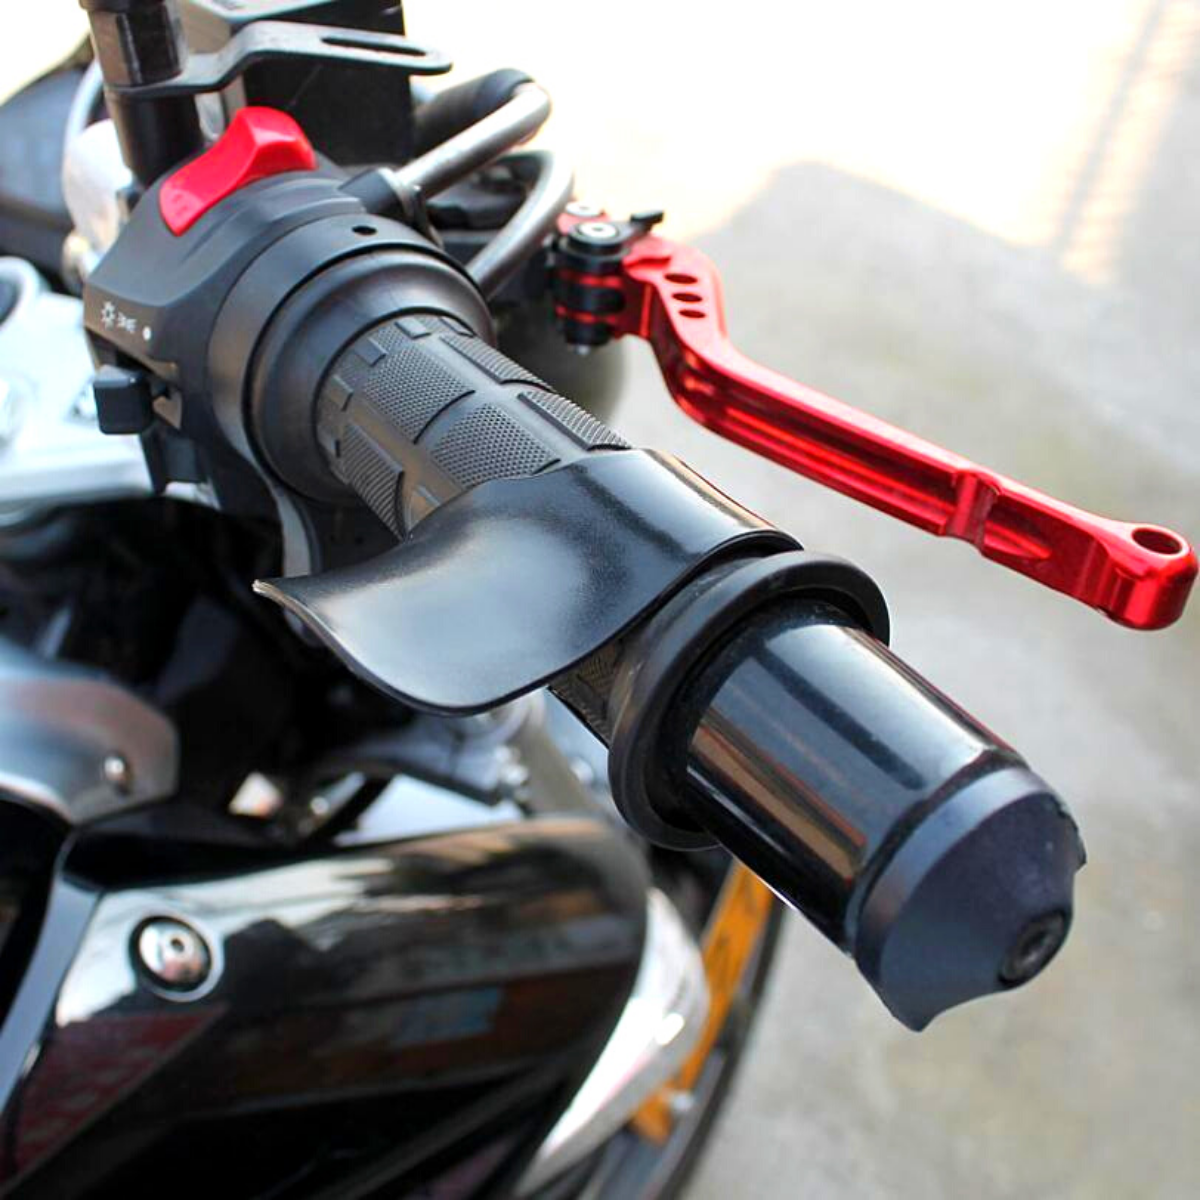 Motorcycle handlebars with universal throttle cruise control attached.